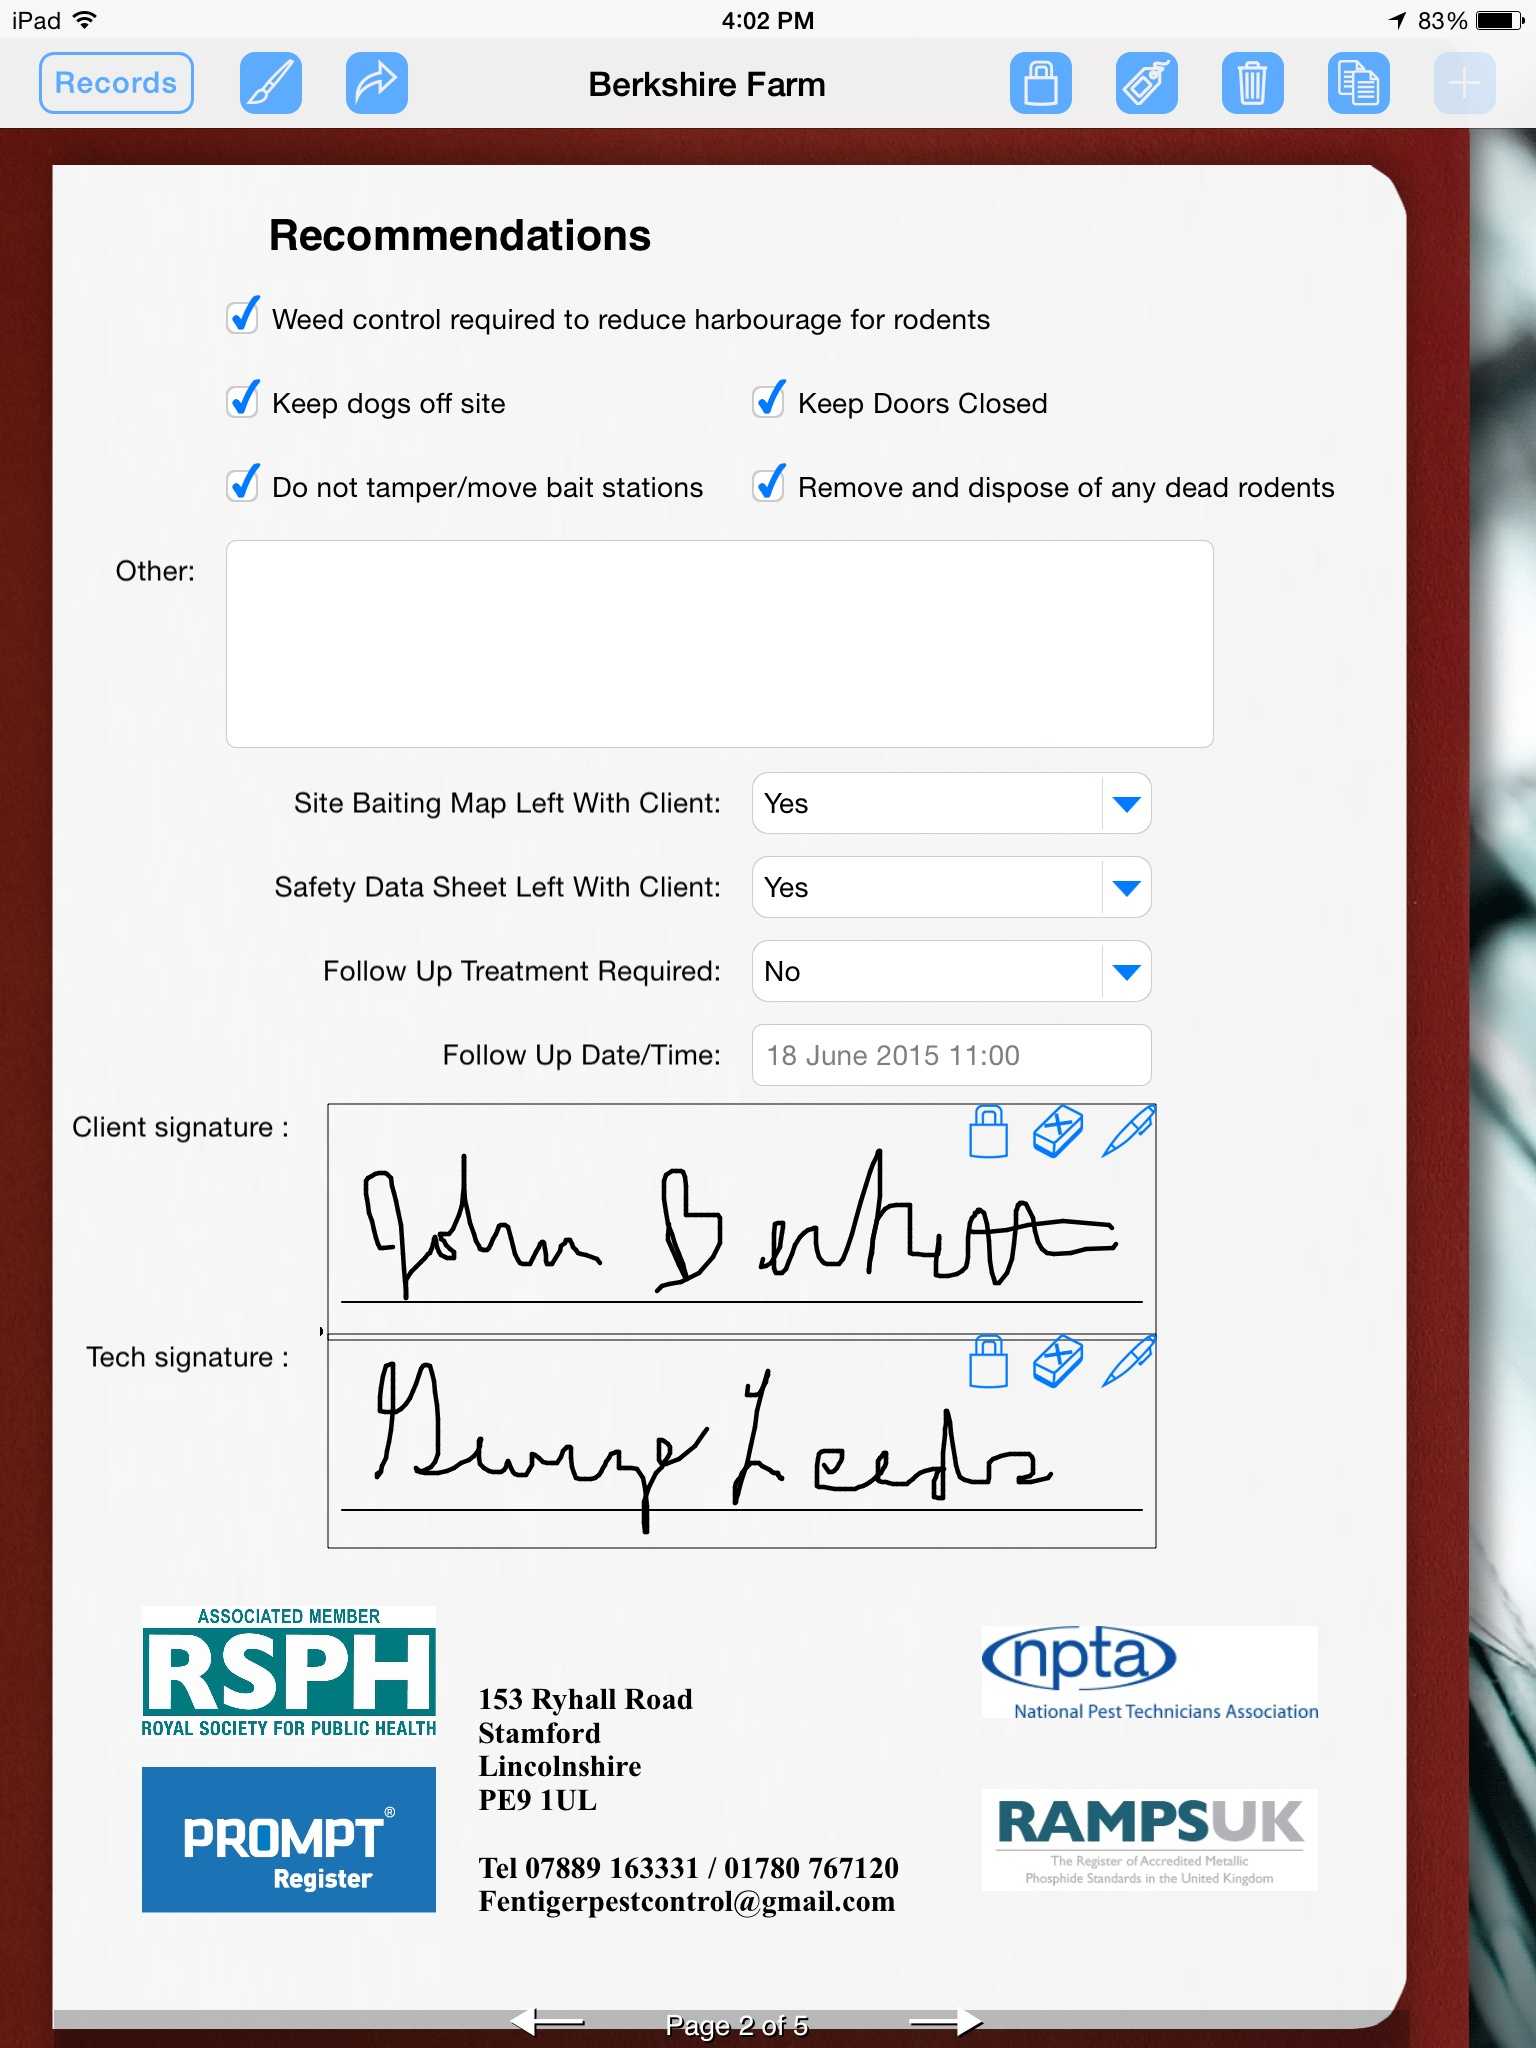 Pest Control Uses Ipad To Prepare Service Report | Form Throughout Pest Control Inspection Report Template